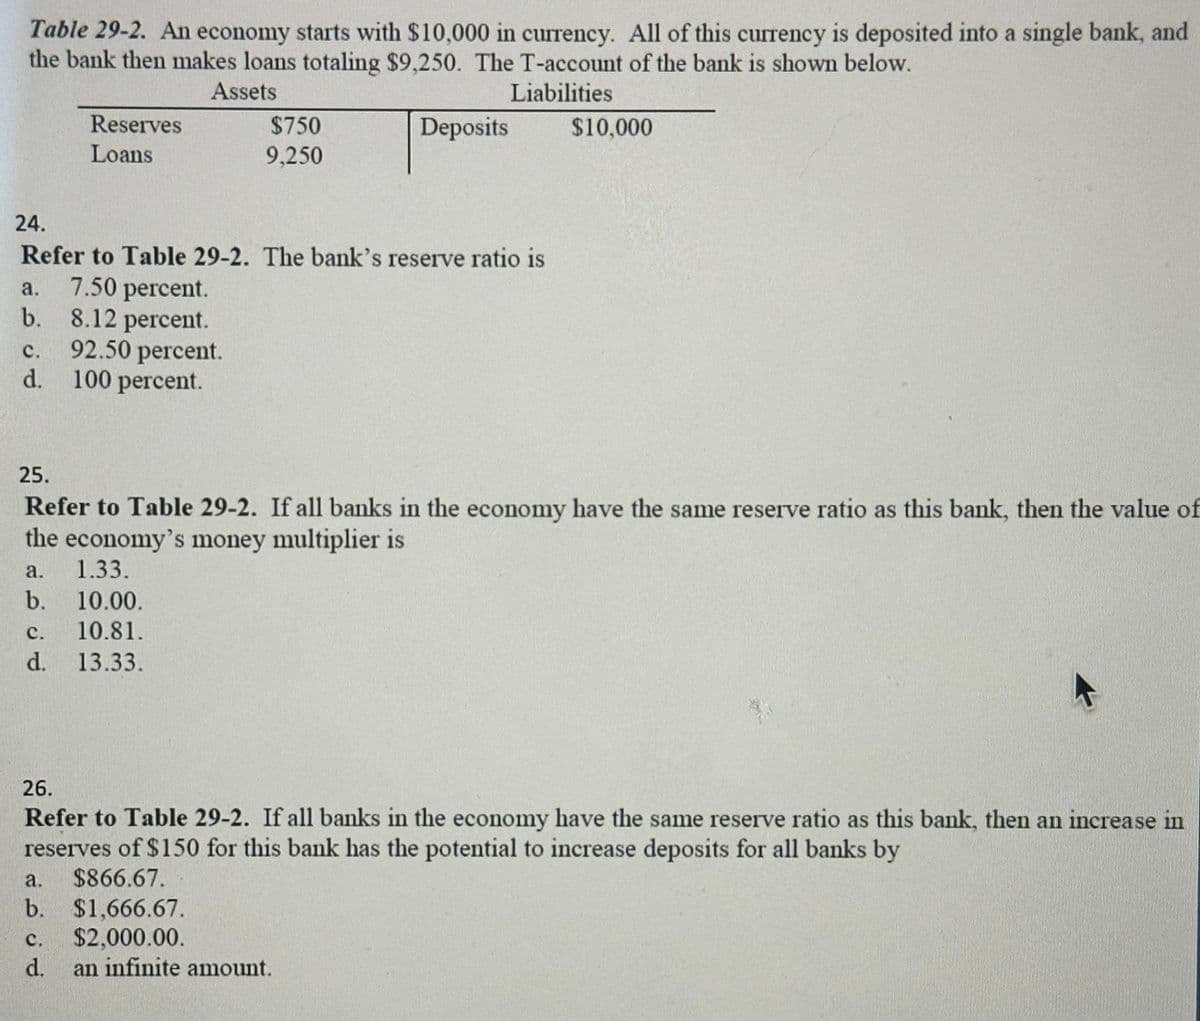 Table 29-2. An economy starts with $10,000 in currency. All of this currency is deposited into a single bank, and
the bank then makes loans totaling $9,250. The T-account of the bank is shown below.
24.
Reserves
Loans
Assets
$750
9,250
Liabilities
Deposits
$10,000
Refer to Table 29-2. The bank's reserve ratio is
a.
7.50 percent.
b. 8.12 percent.
C.
92.50 percent.
d.
100 percent.
25.
Refer to Table 29-2. If all banks in the economy have the same reserve ratio as this bank, then the value of
the economy's money multiplier is
a. 1.33.
b. 10.00.
C. 10.81.
d. 13.33.
26.
Refer to Table 29-2. If all banks in the economy have the same reserve ratio as this bank, then an increase in
reserves of $150 for this bank has the potential to increase deposits for all banks by
a.
$866.67.
b. $1,666.67.
C.
$2,000.00.
d.
an infinite amount.